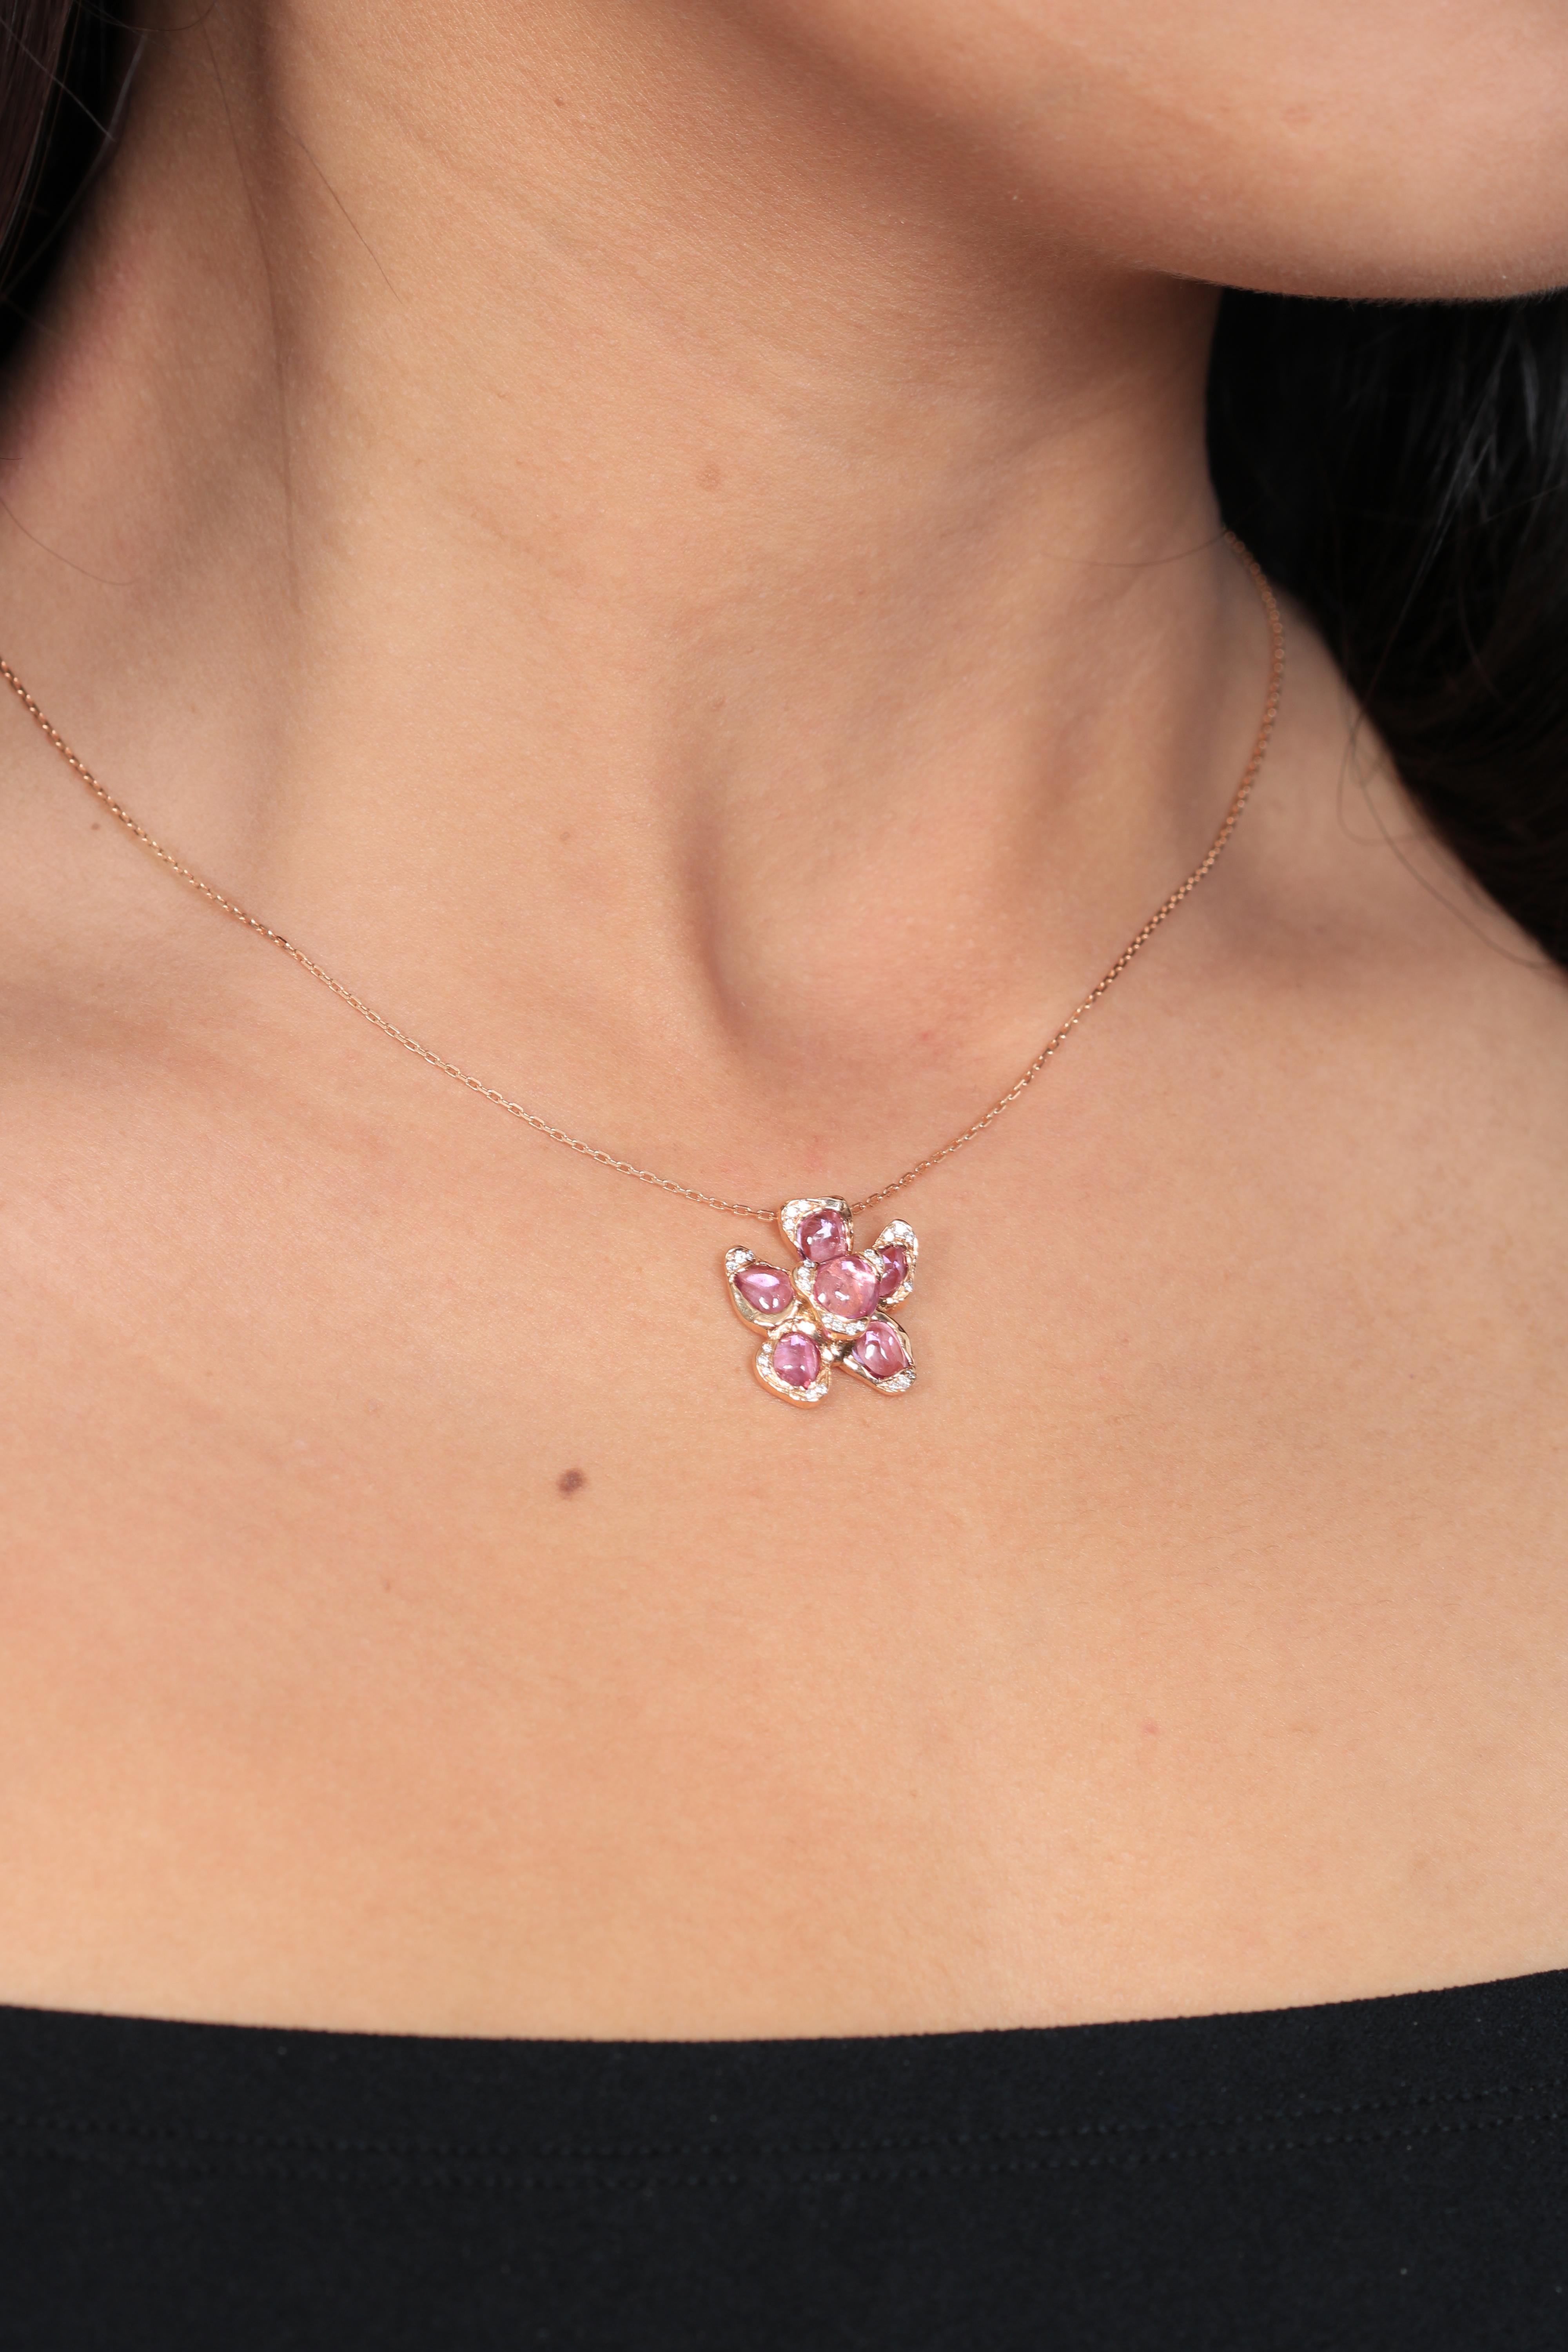 Romantic 18 Karat Rose Gold Flower Pendant with Pink Sapphires For Sale